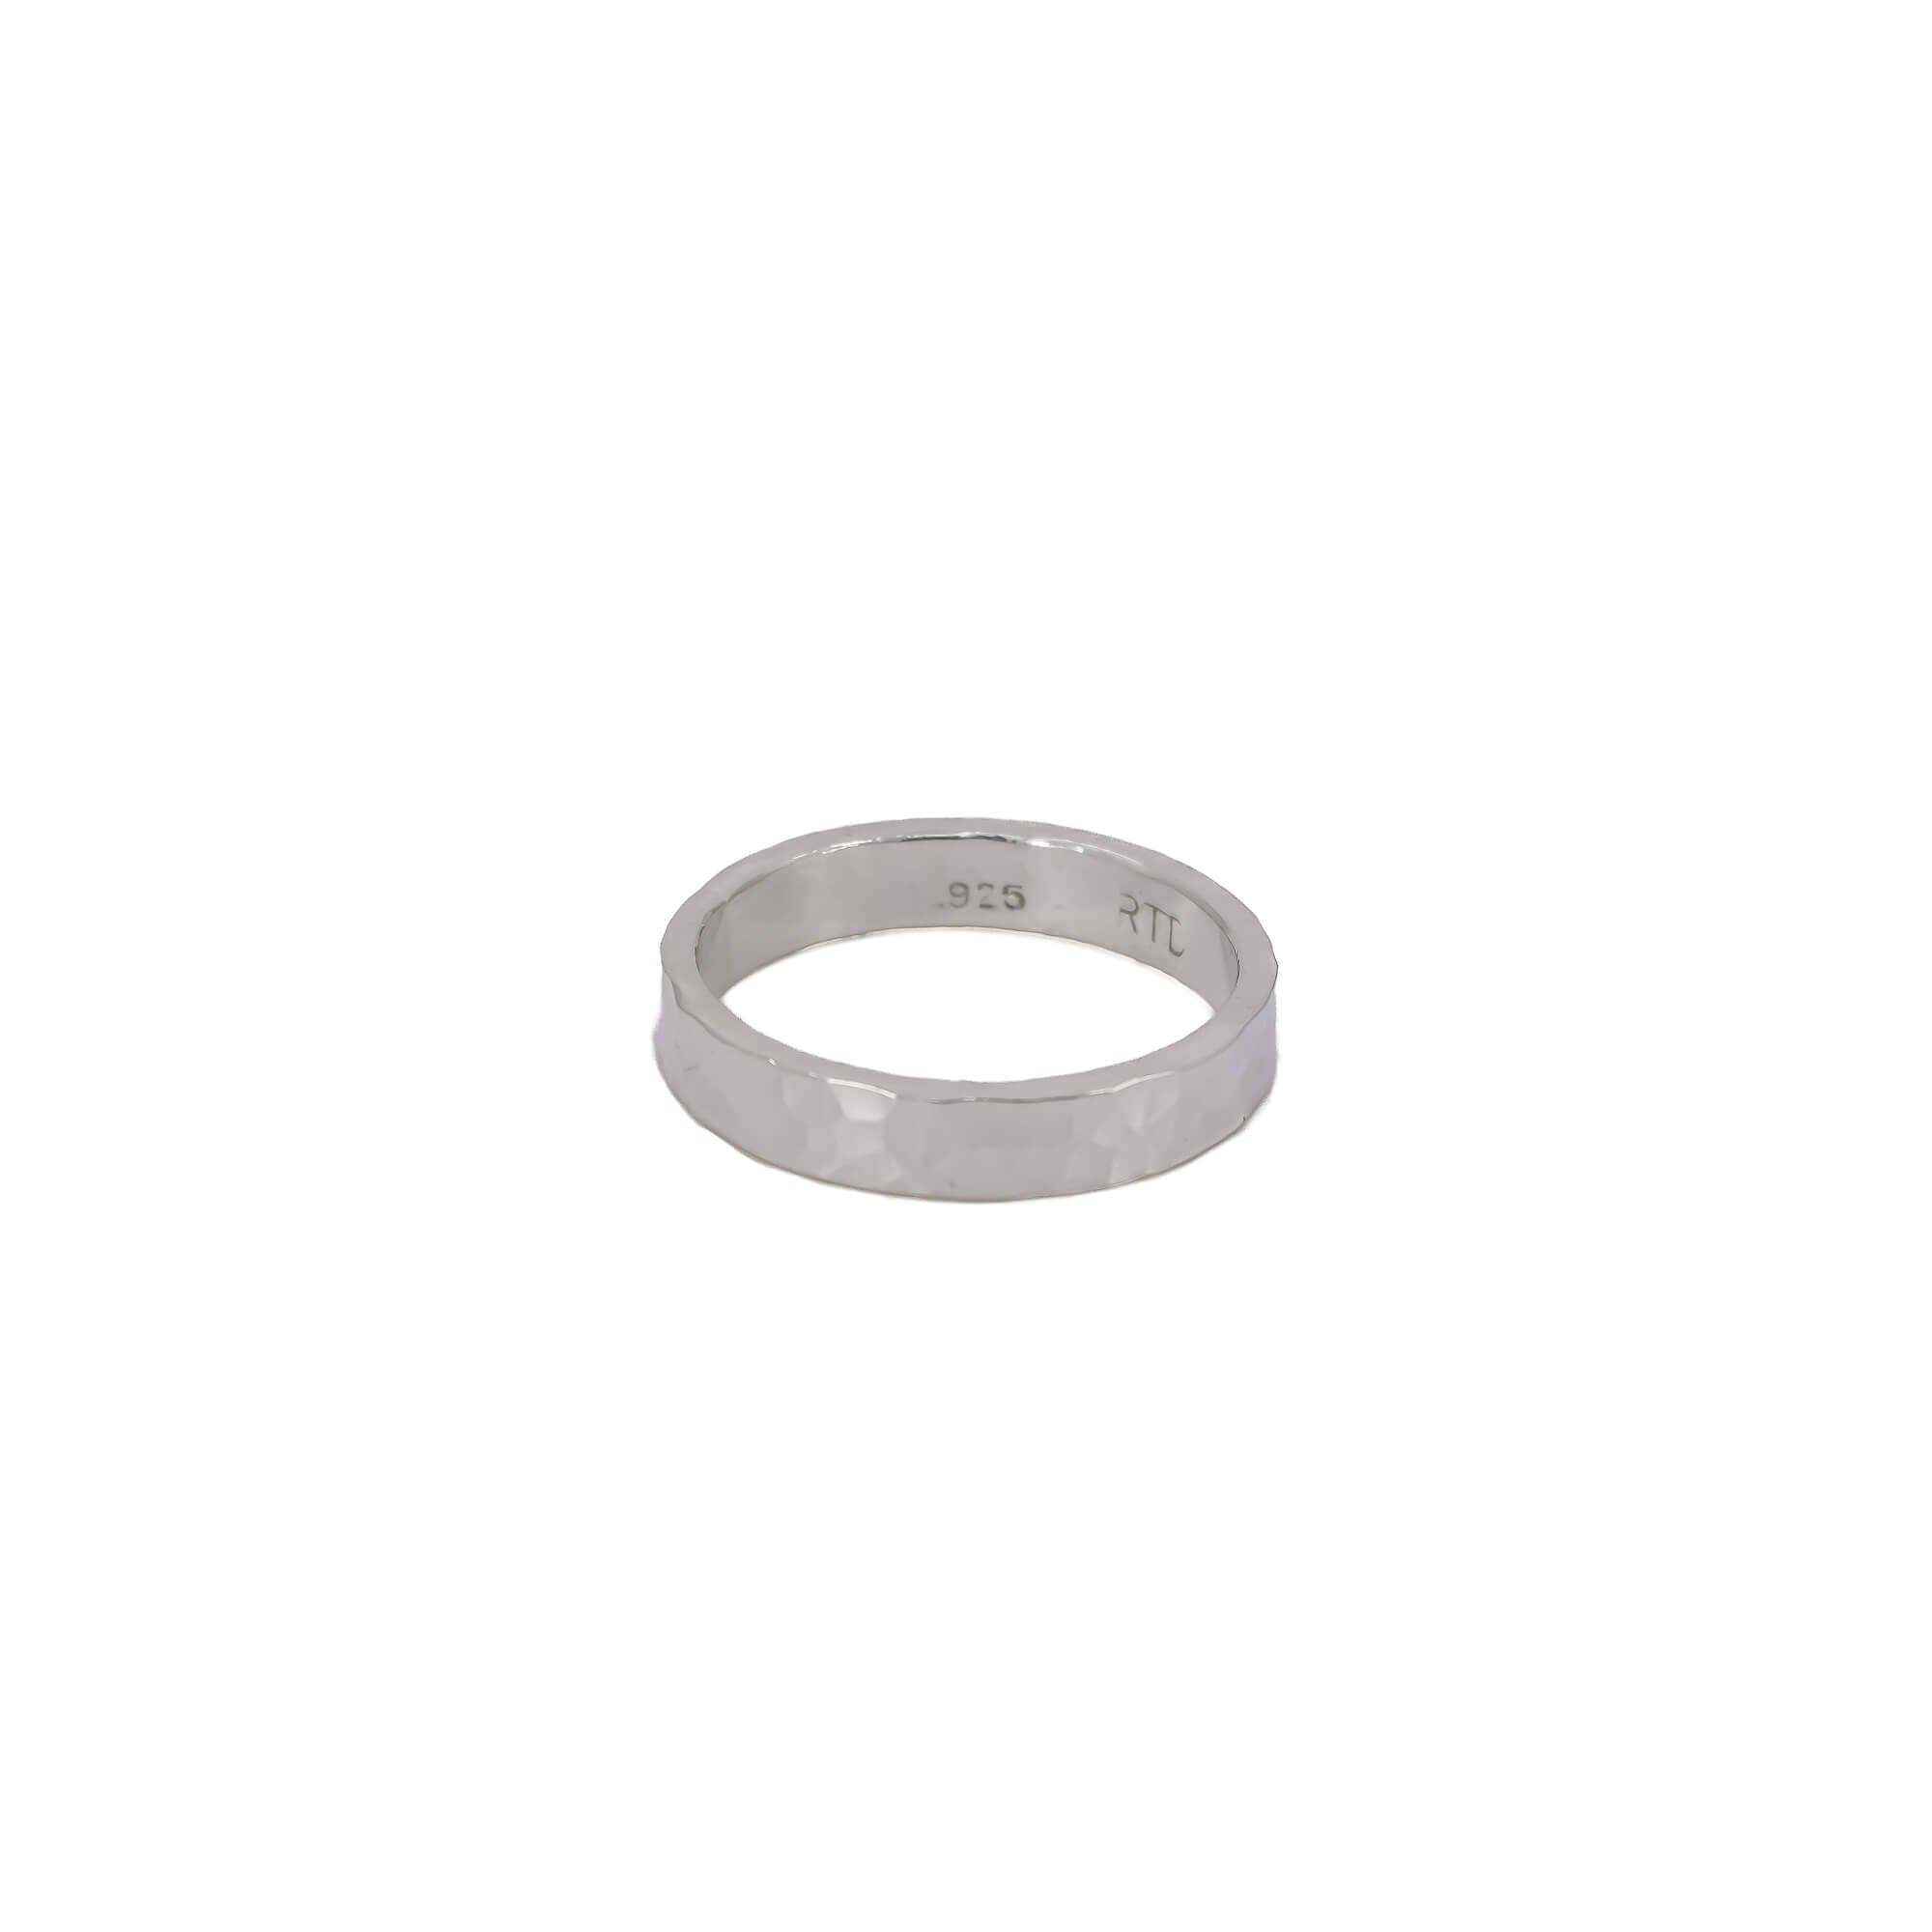 Textured 4mm sterling silver ring band